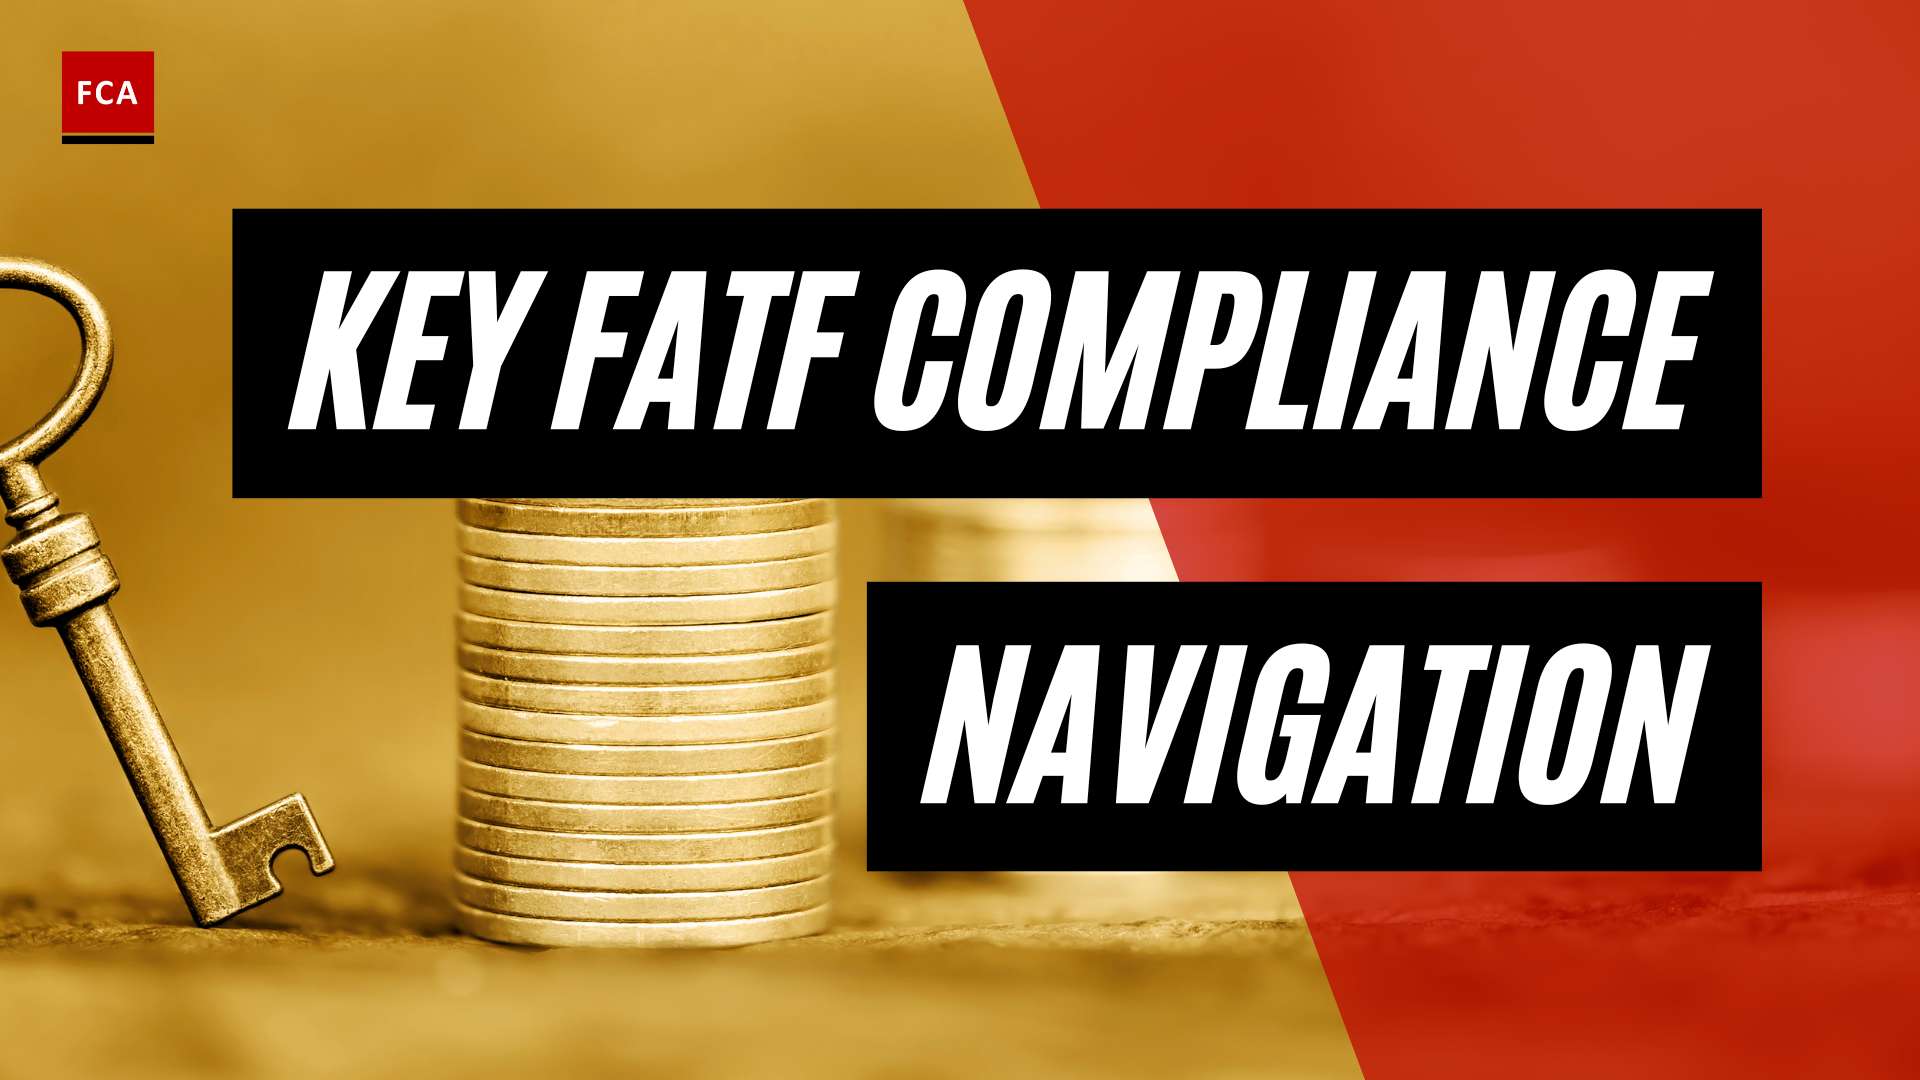 Navigating The Compliance Landscape: Key Insights On Fatf Mutual Evaluations Navigating The Compliance Landscape: Key Insights On Fatf Mutual Evaluati